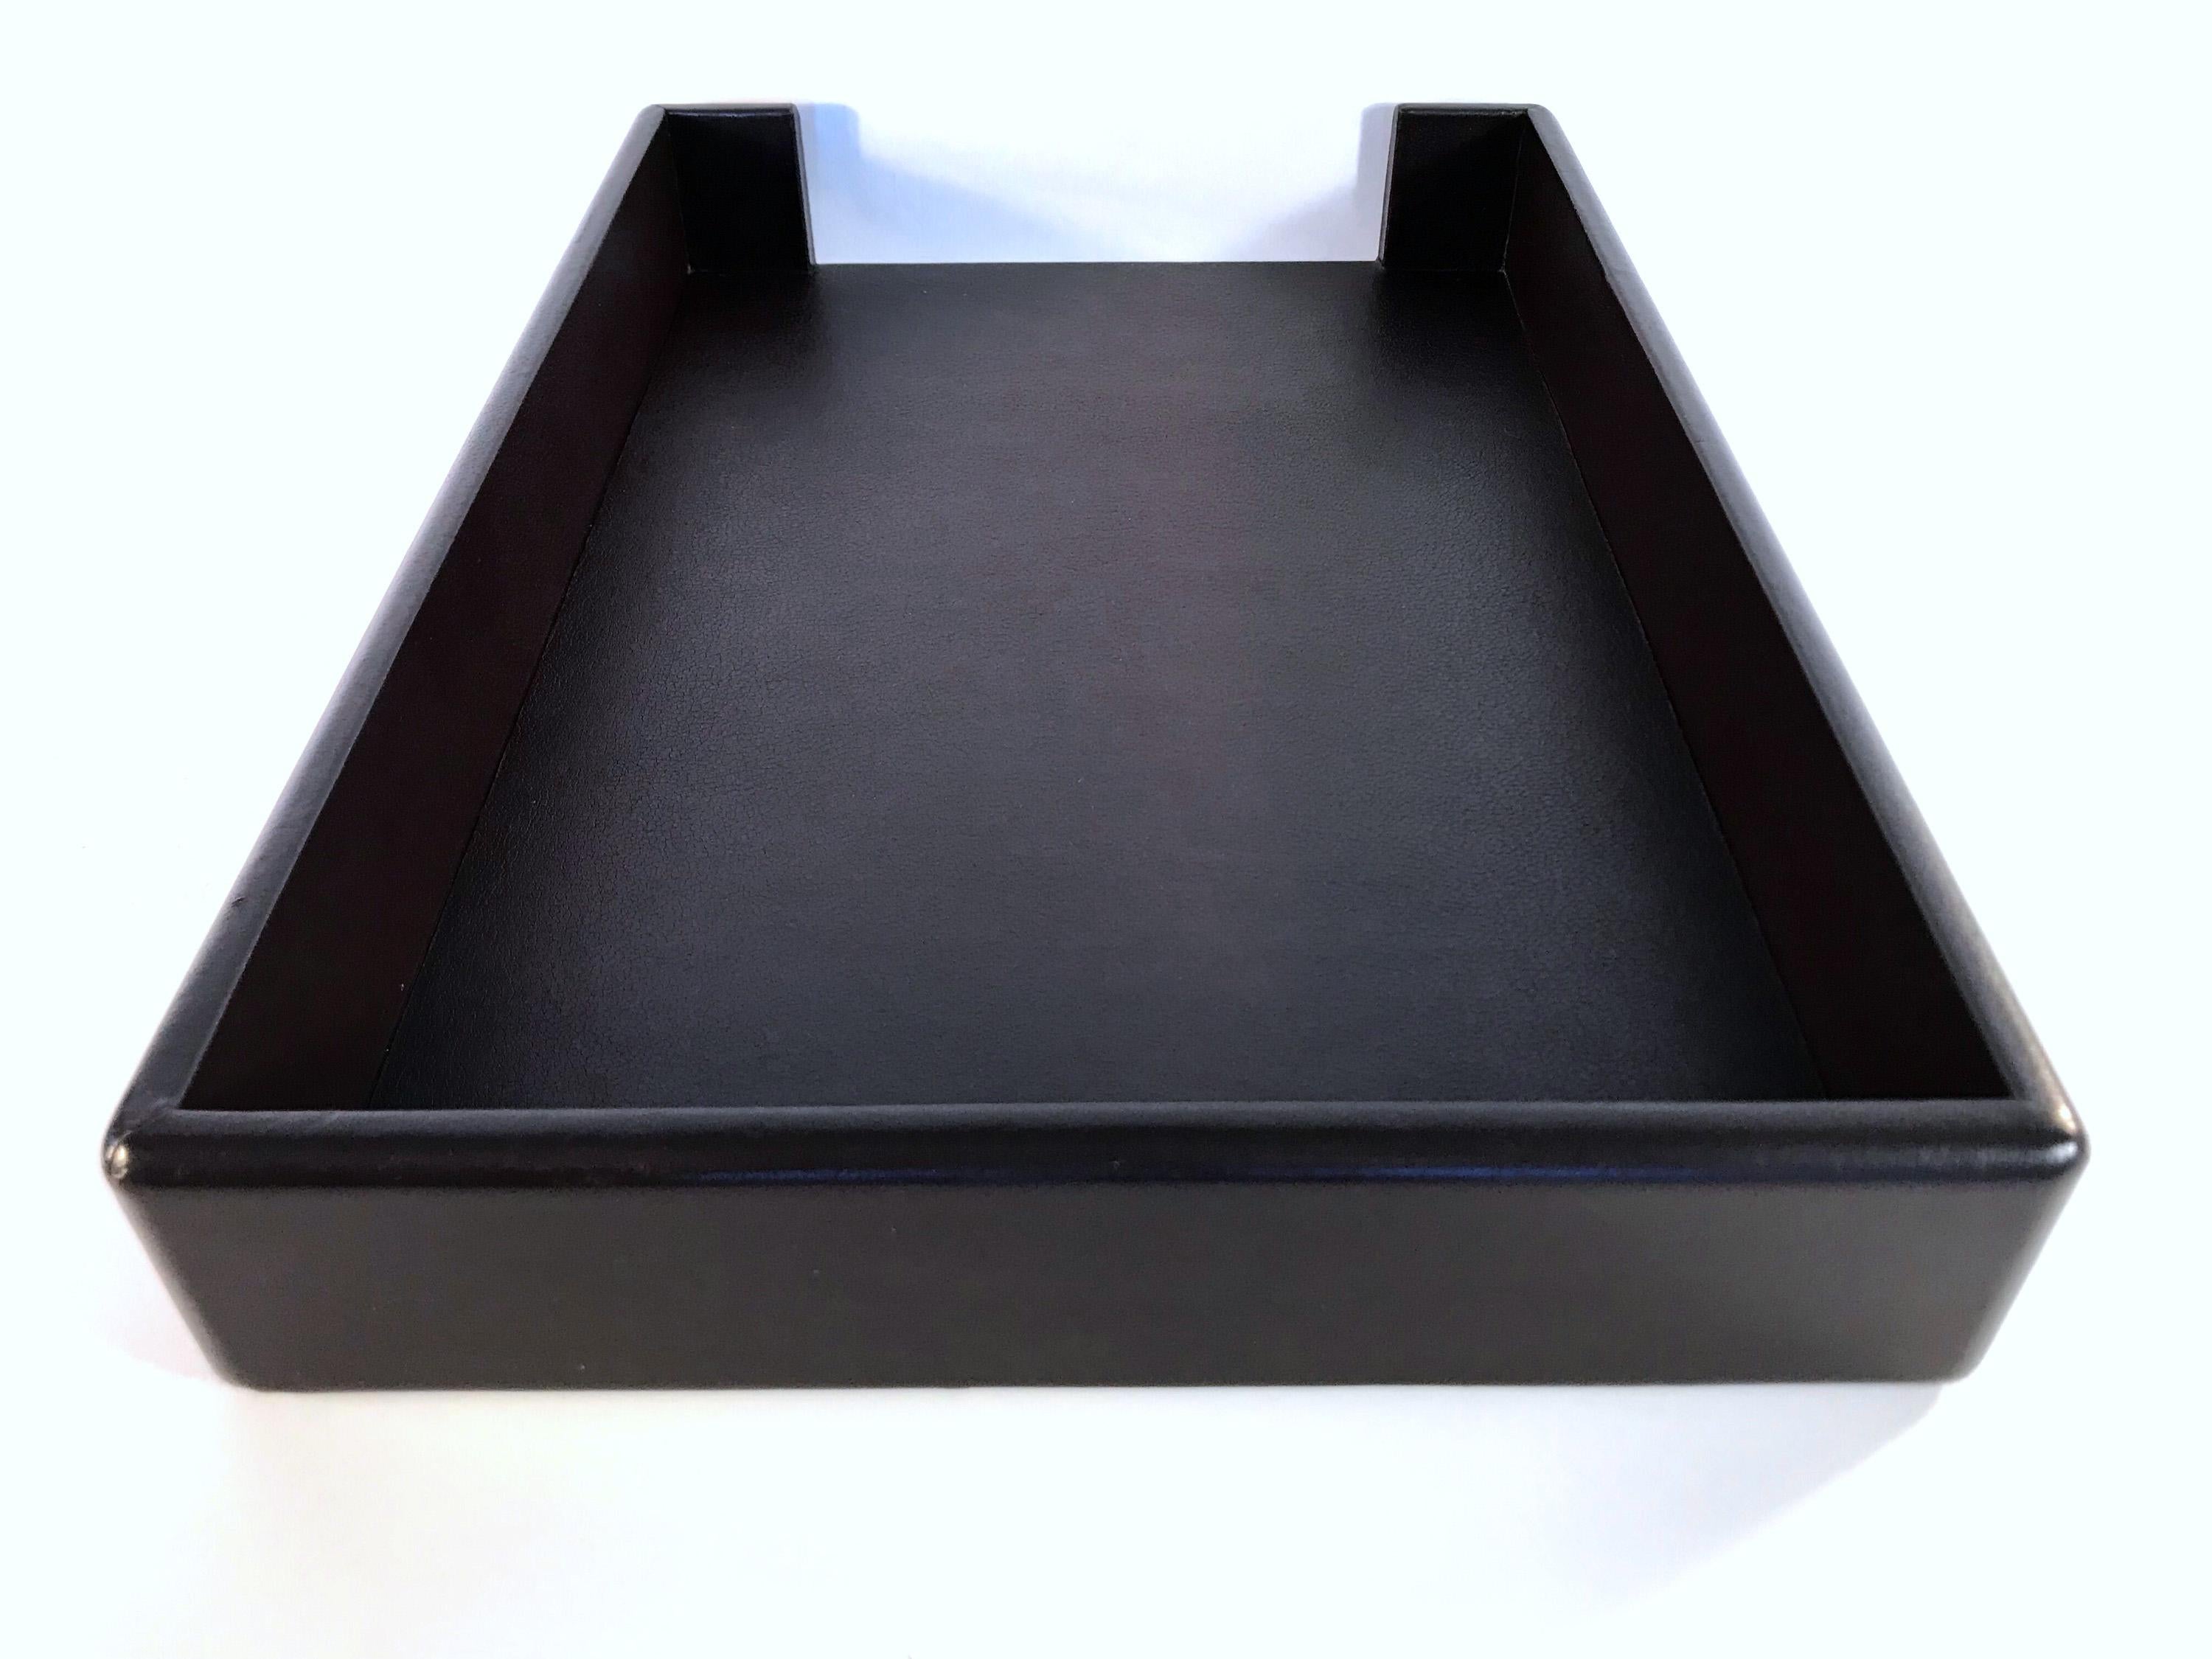 Late 20th Century Knoll Leather Wrapped Leather Paper Desk Tray by Smokador in Chocolate Brown